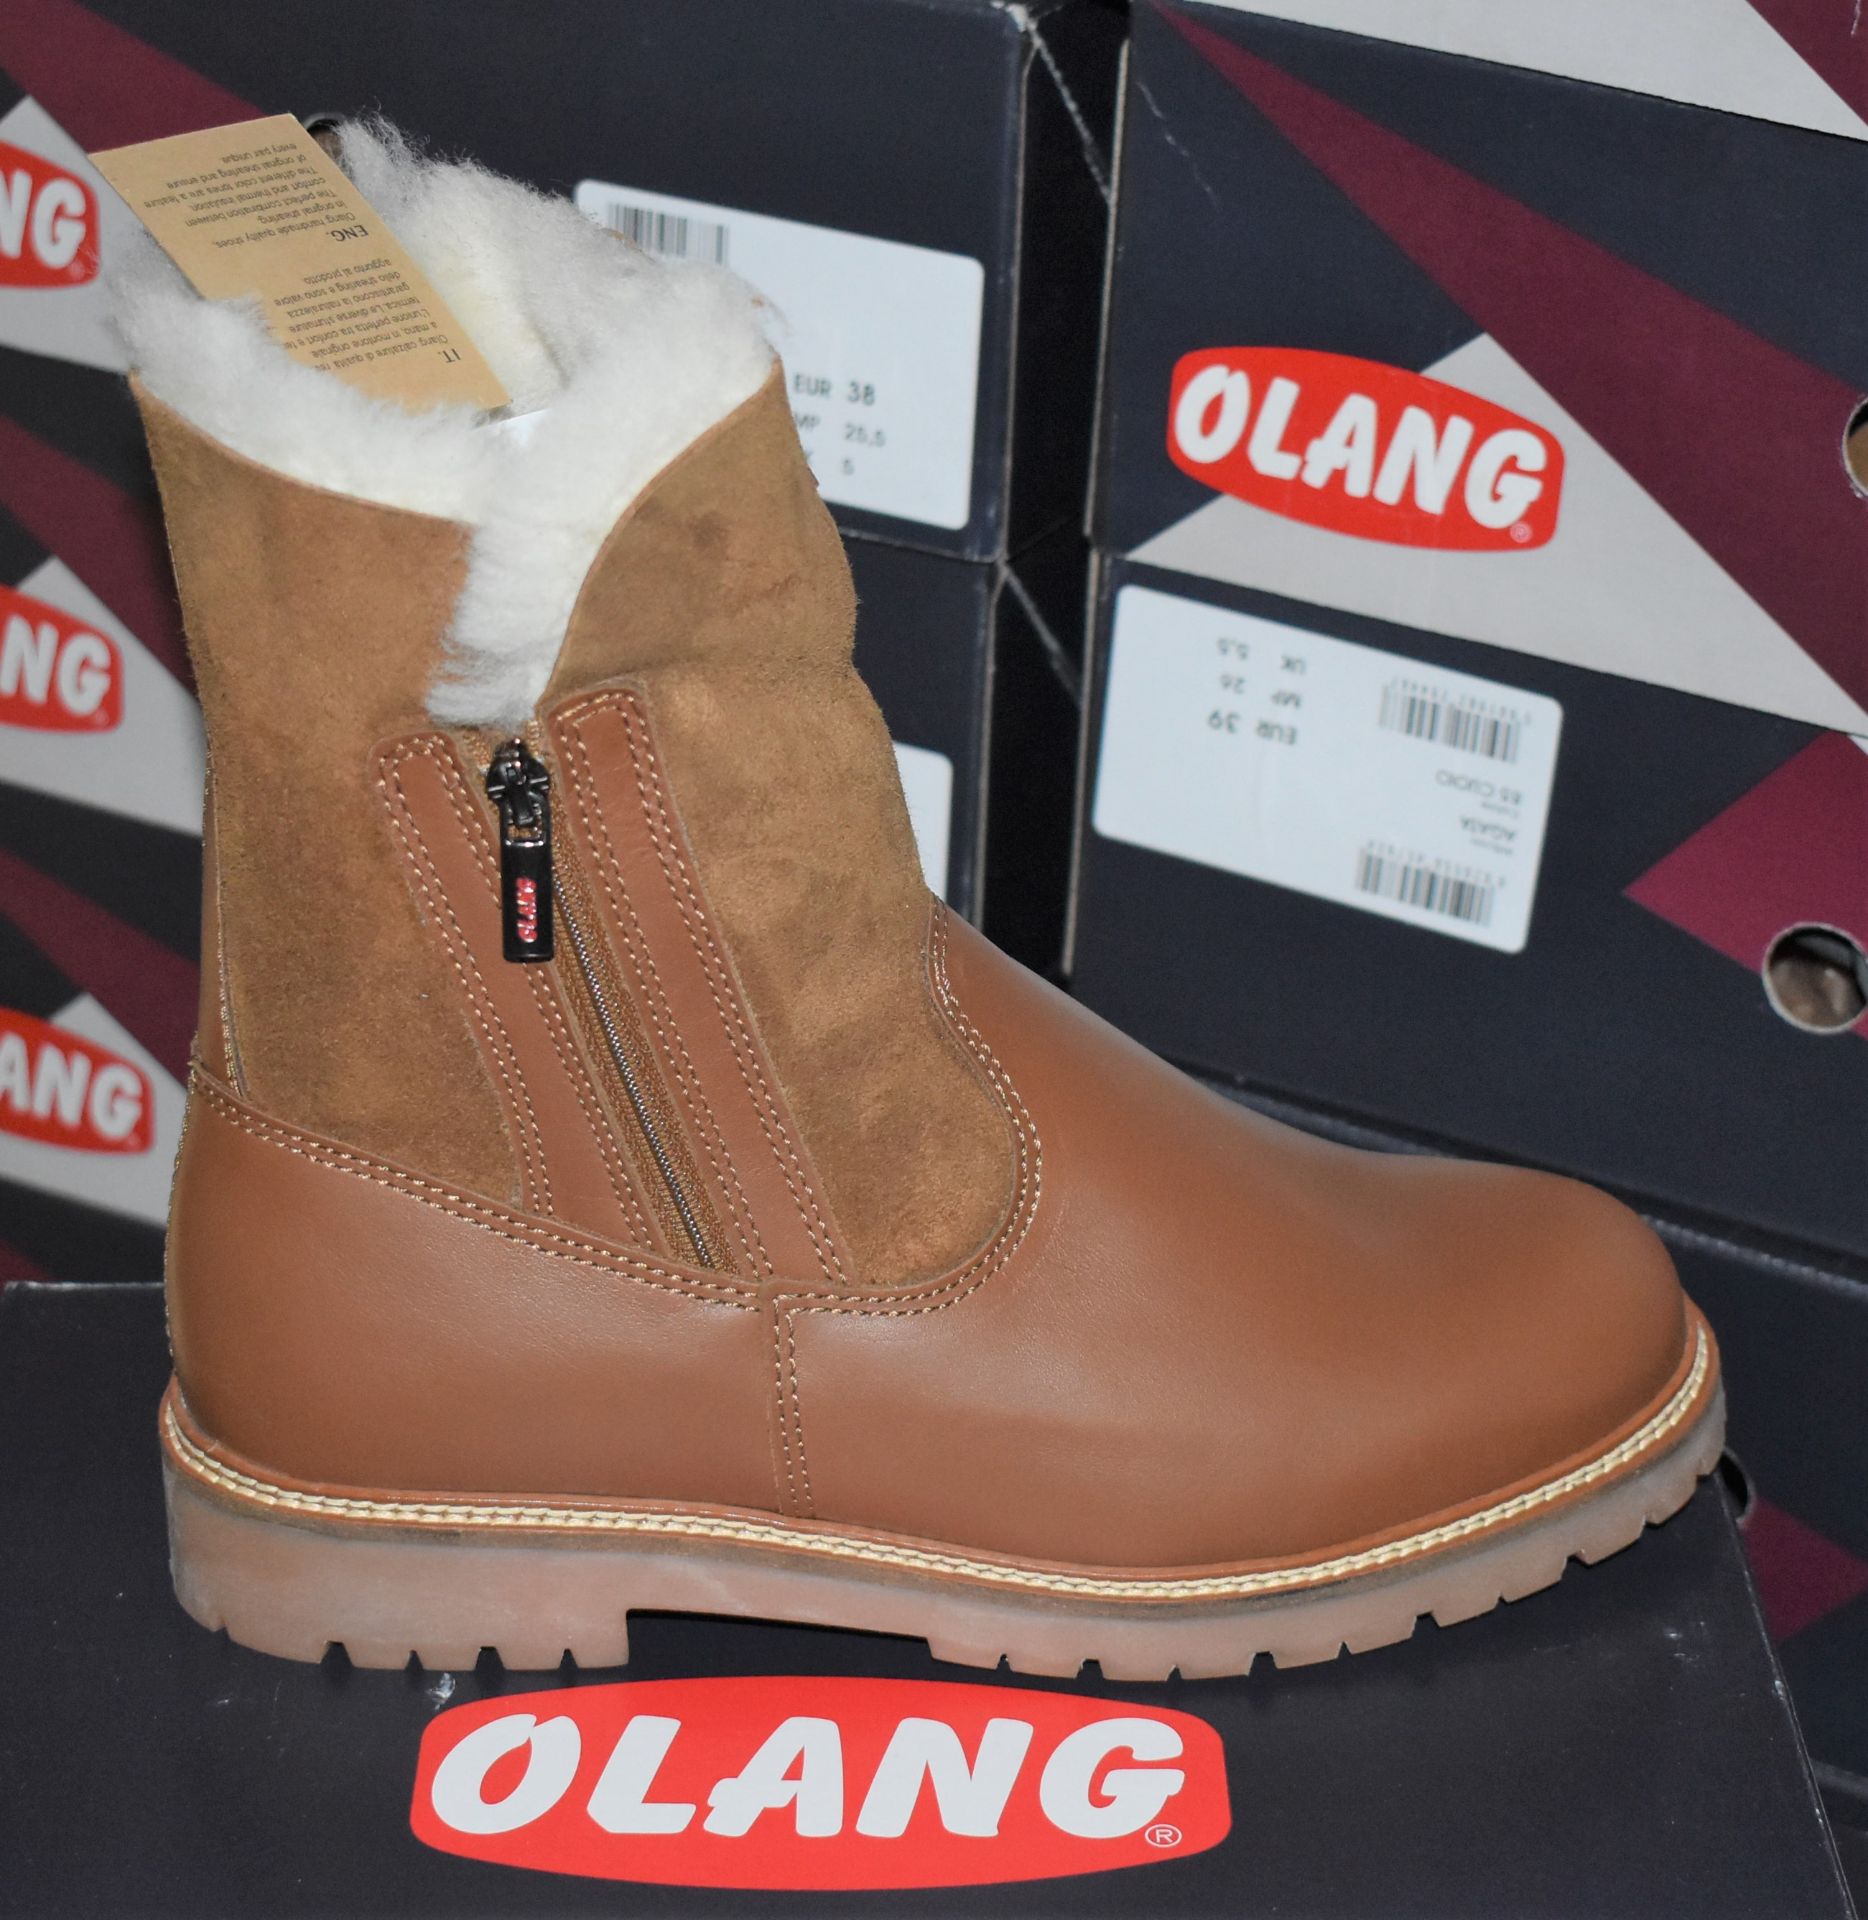 1 x Pair of Designer Olang Debora 85 Cuoio Women's Winter Boots - Euro Size 40 - Brand New Boxed - Image 4 of 6